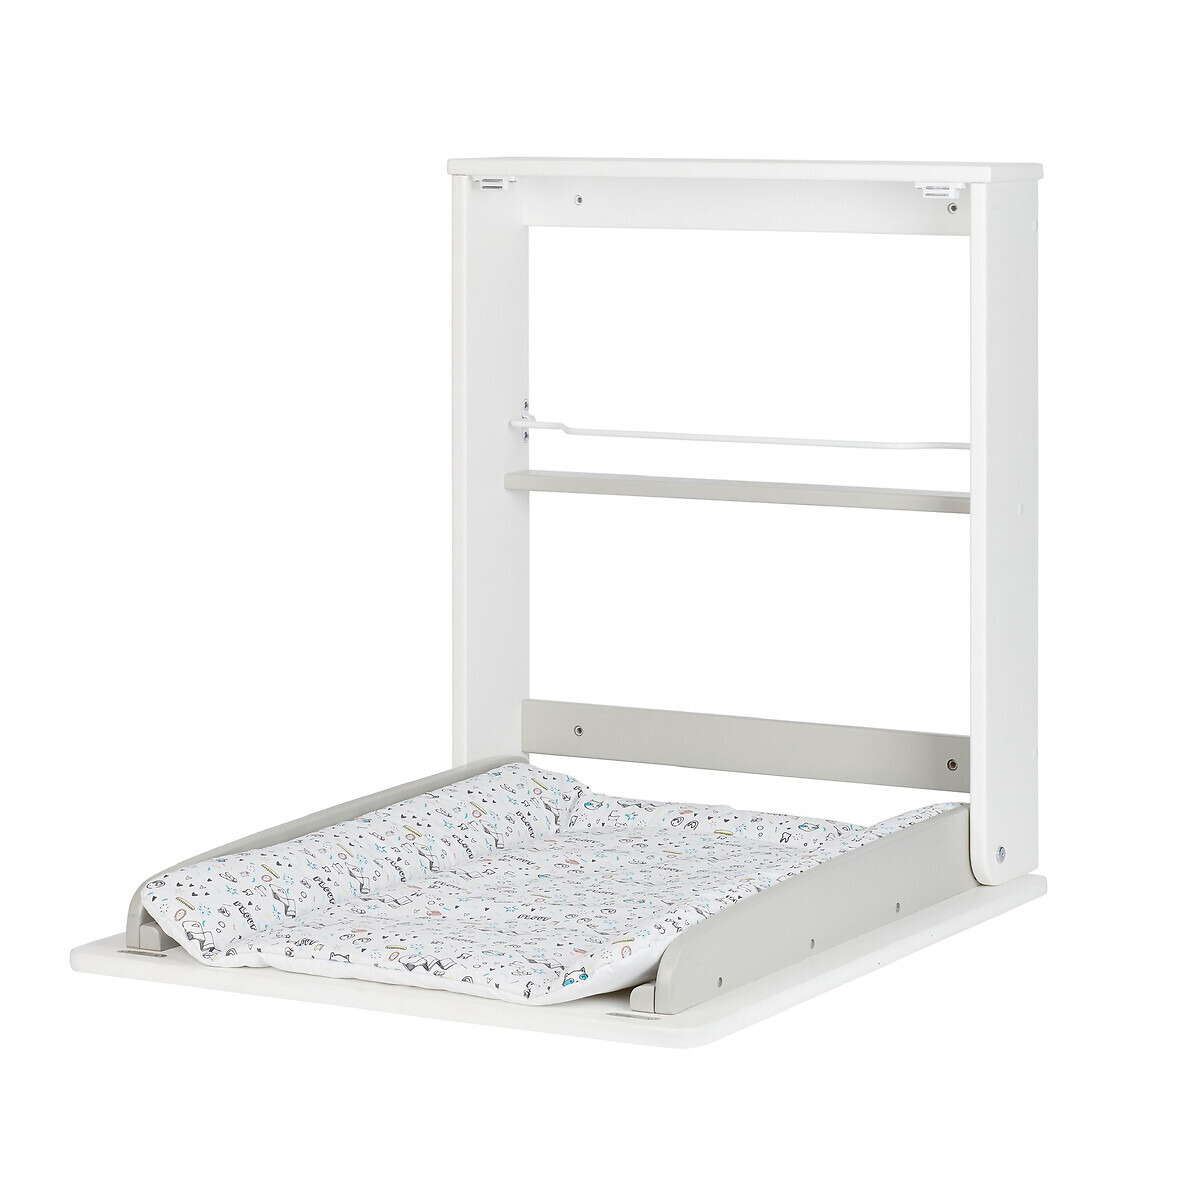 Plouf Compact Wall-Mounted Changing Table - image 1